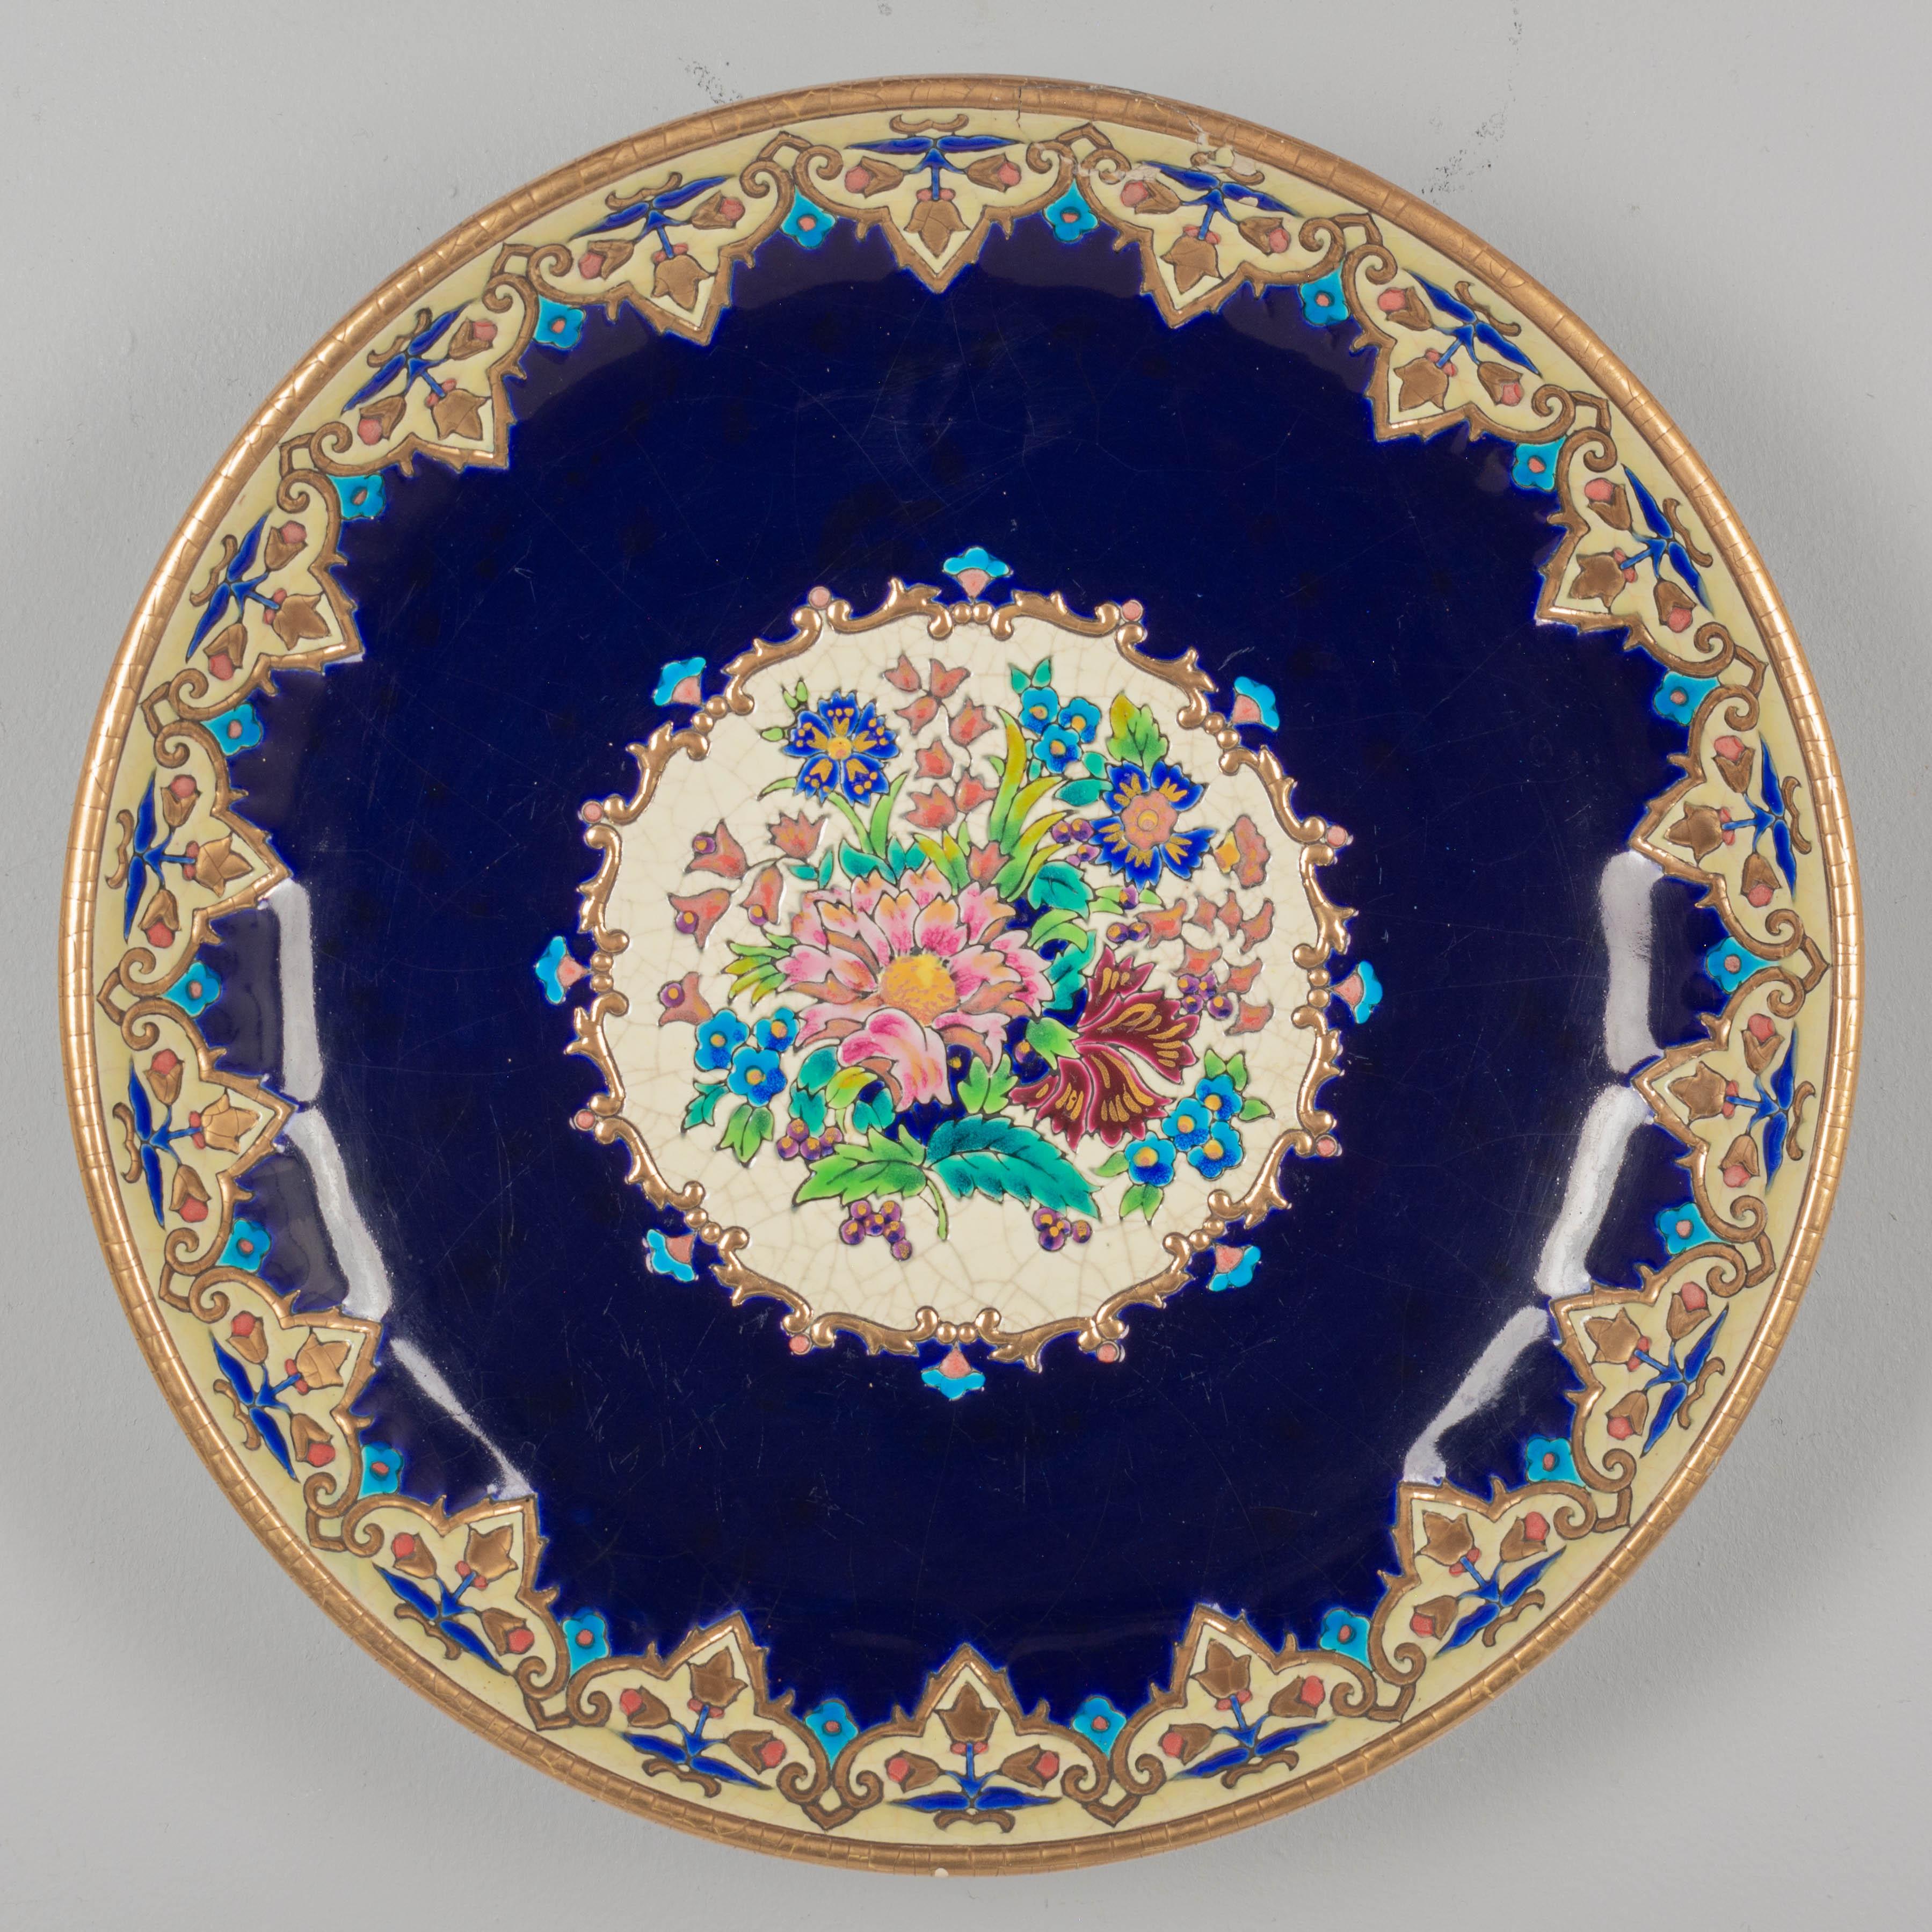 A French Art Deco Longwy large ceramic centerpiece bowl, hand-painted in the style of Chinoiserie cloisonné enamel. Dark cobalt blue ground with a colorful central floral bouquet in, pink, orange, magenta, green and blue.  Decorative border accented